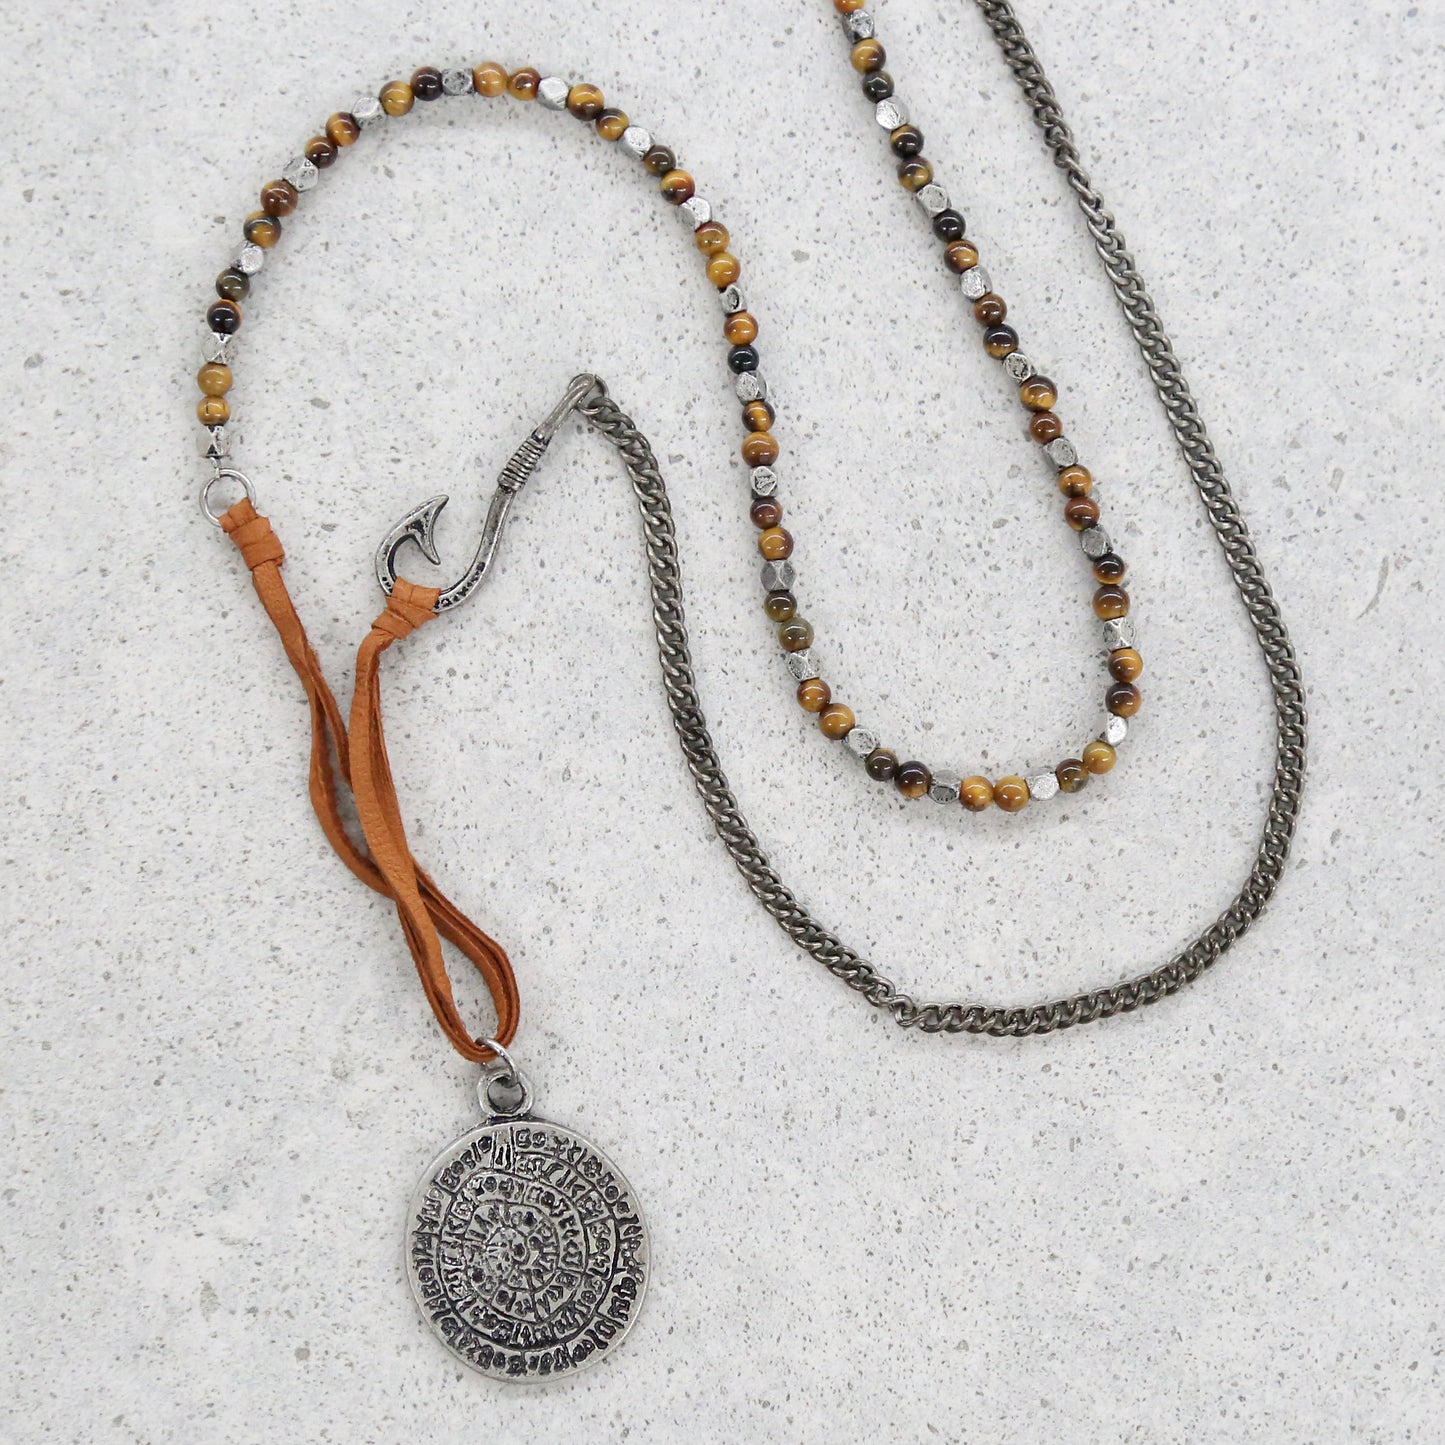 No Stone Unturned Necklace in Tiger's Eye and Antique Silver